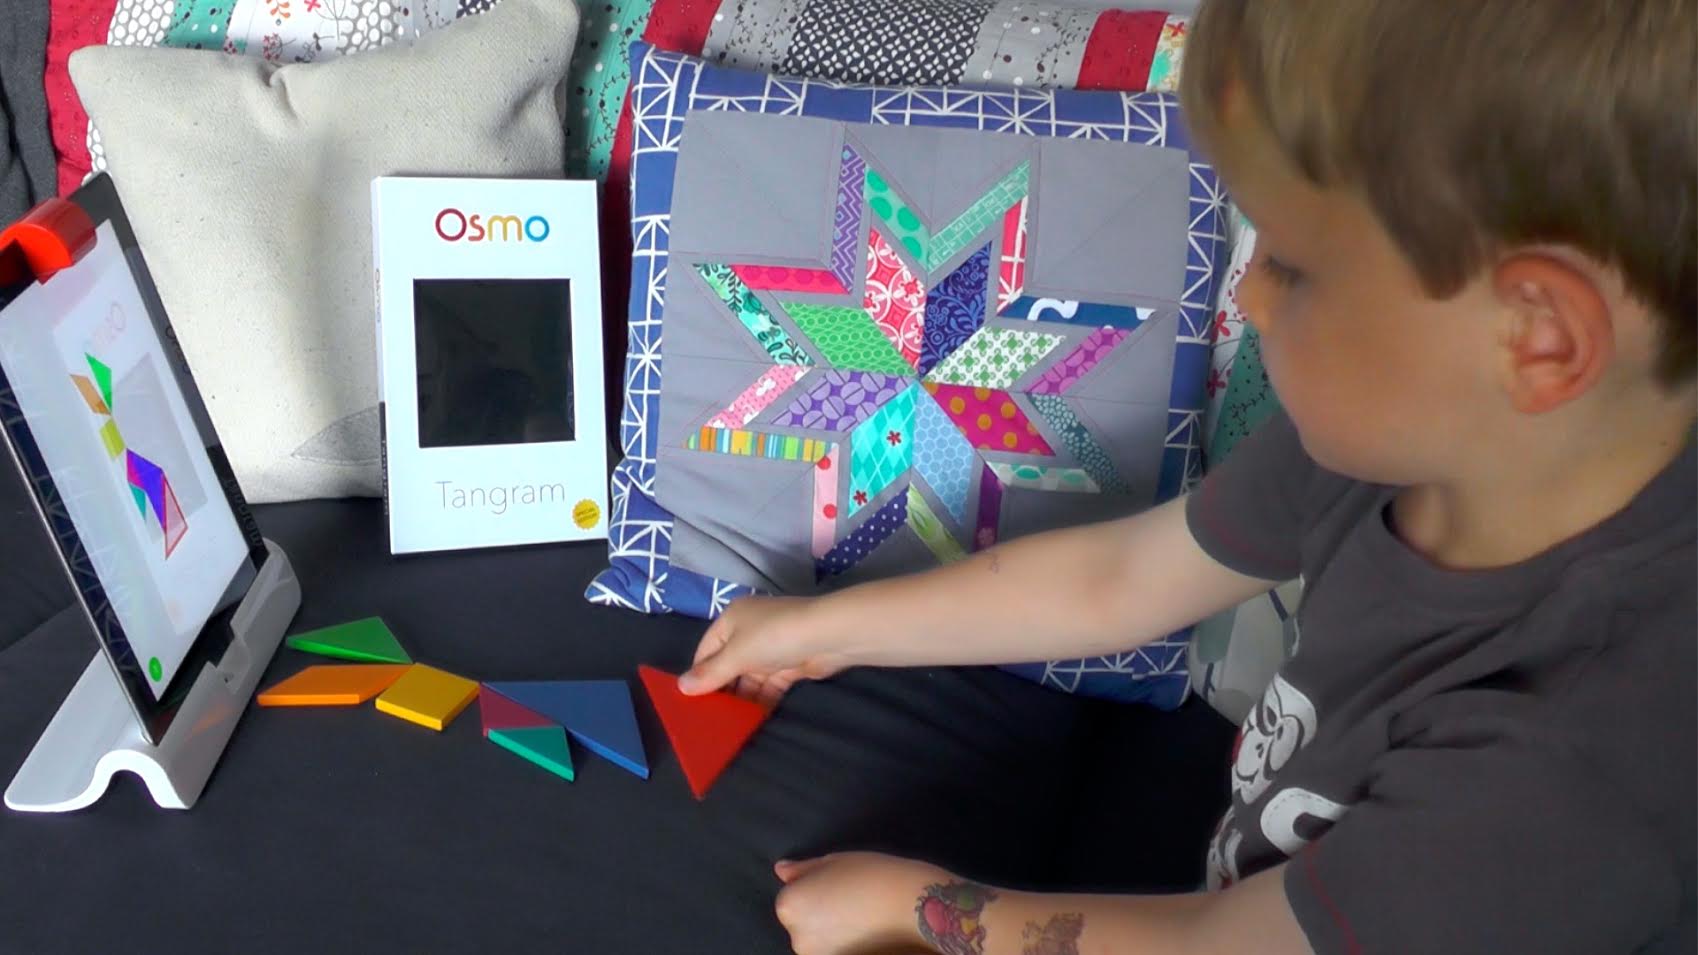 Osmo mixes board games and iPad apps together